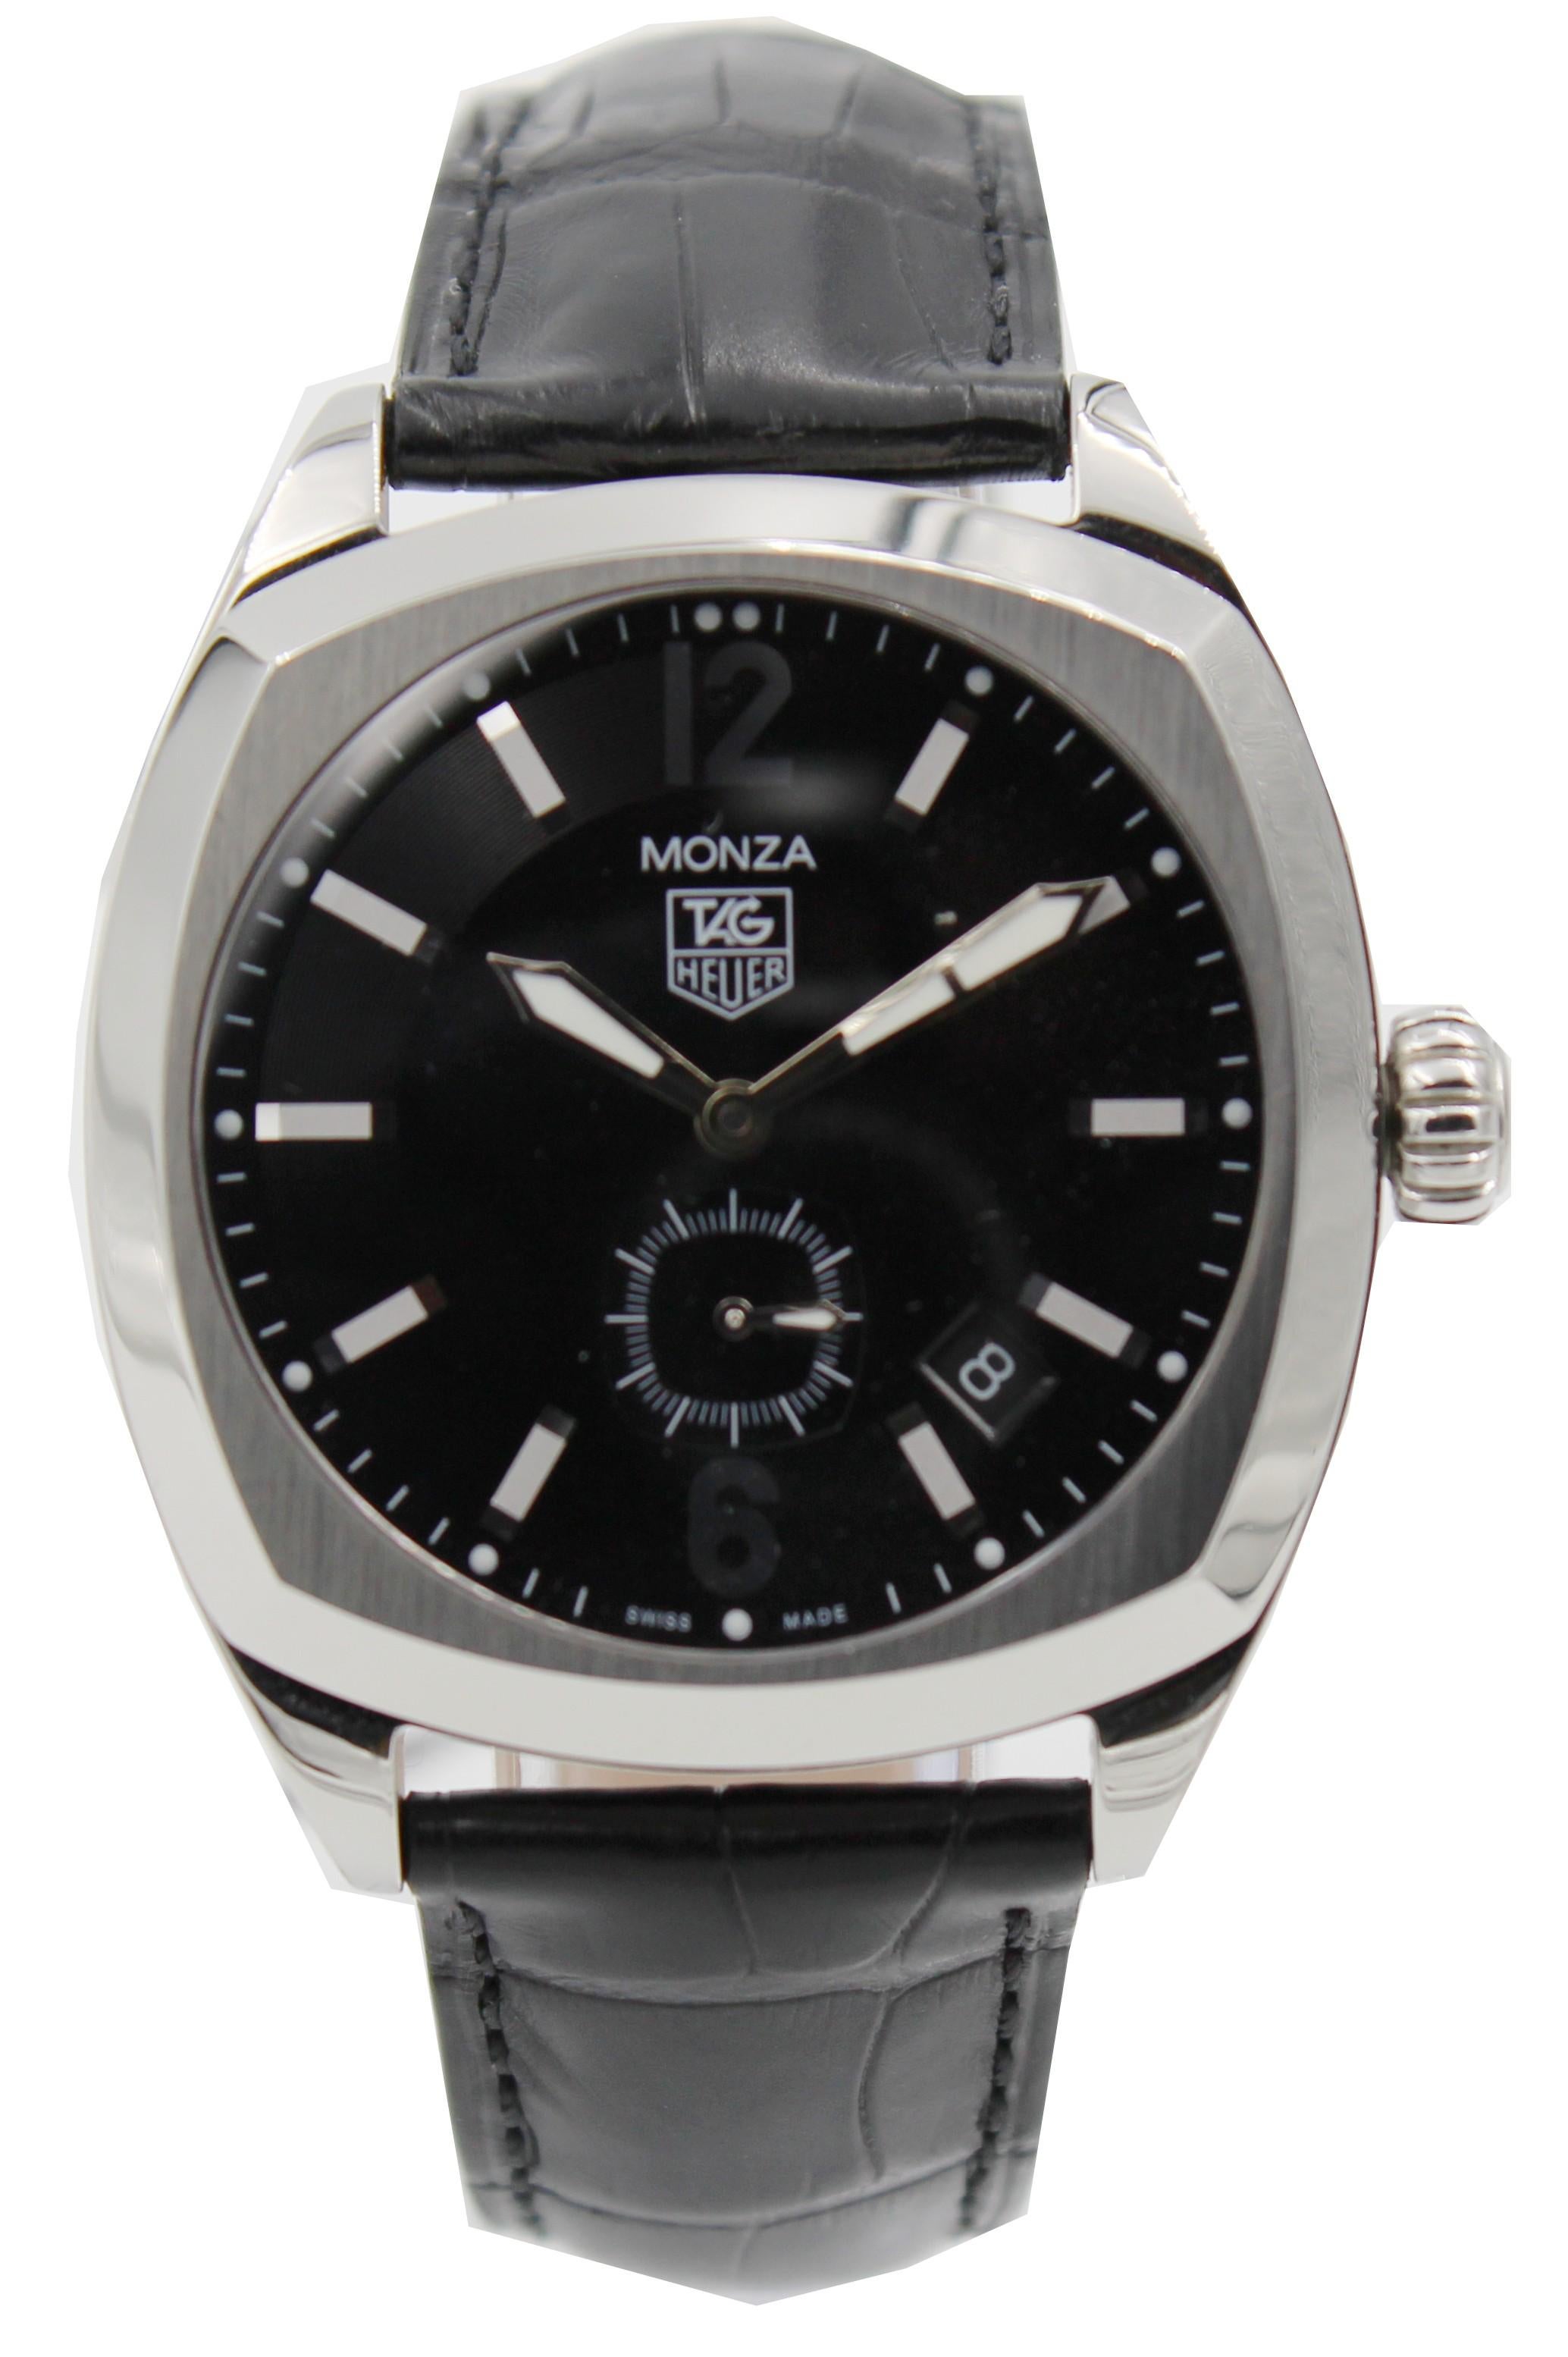 TAG Heuer Monza WR2110 Men's Automatic Watch Black Dial Stainless Steel 1